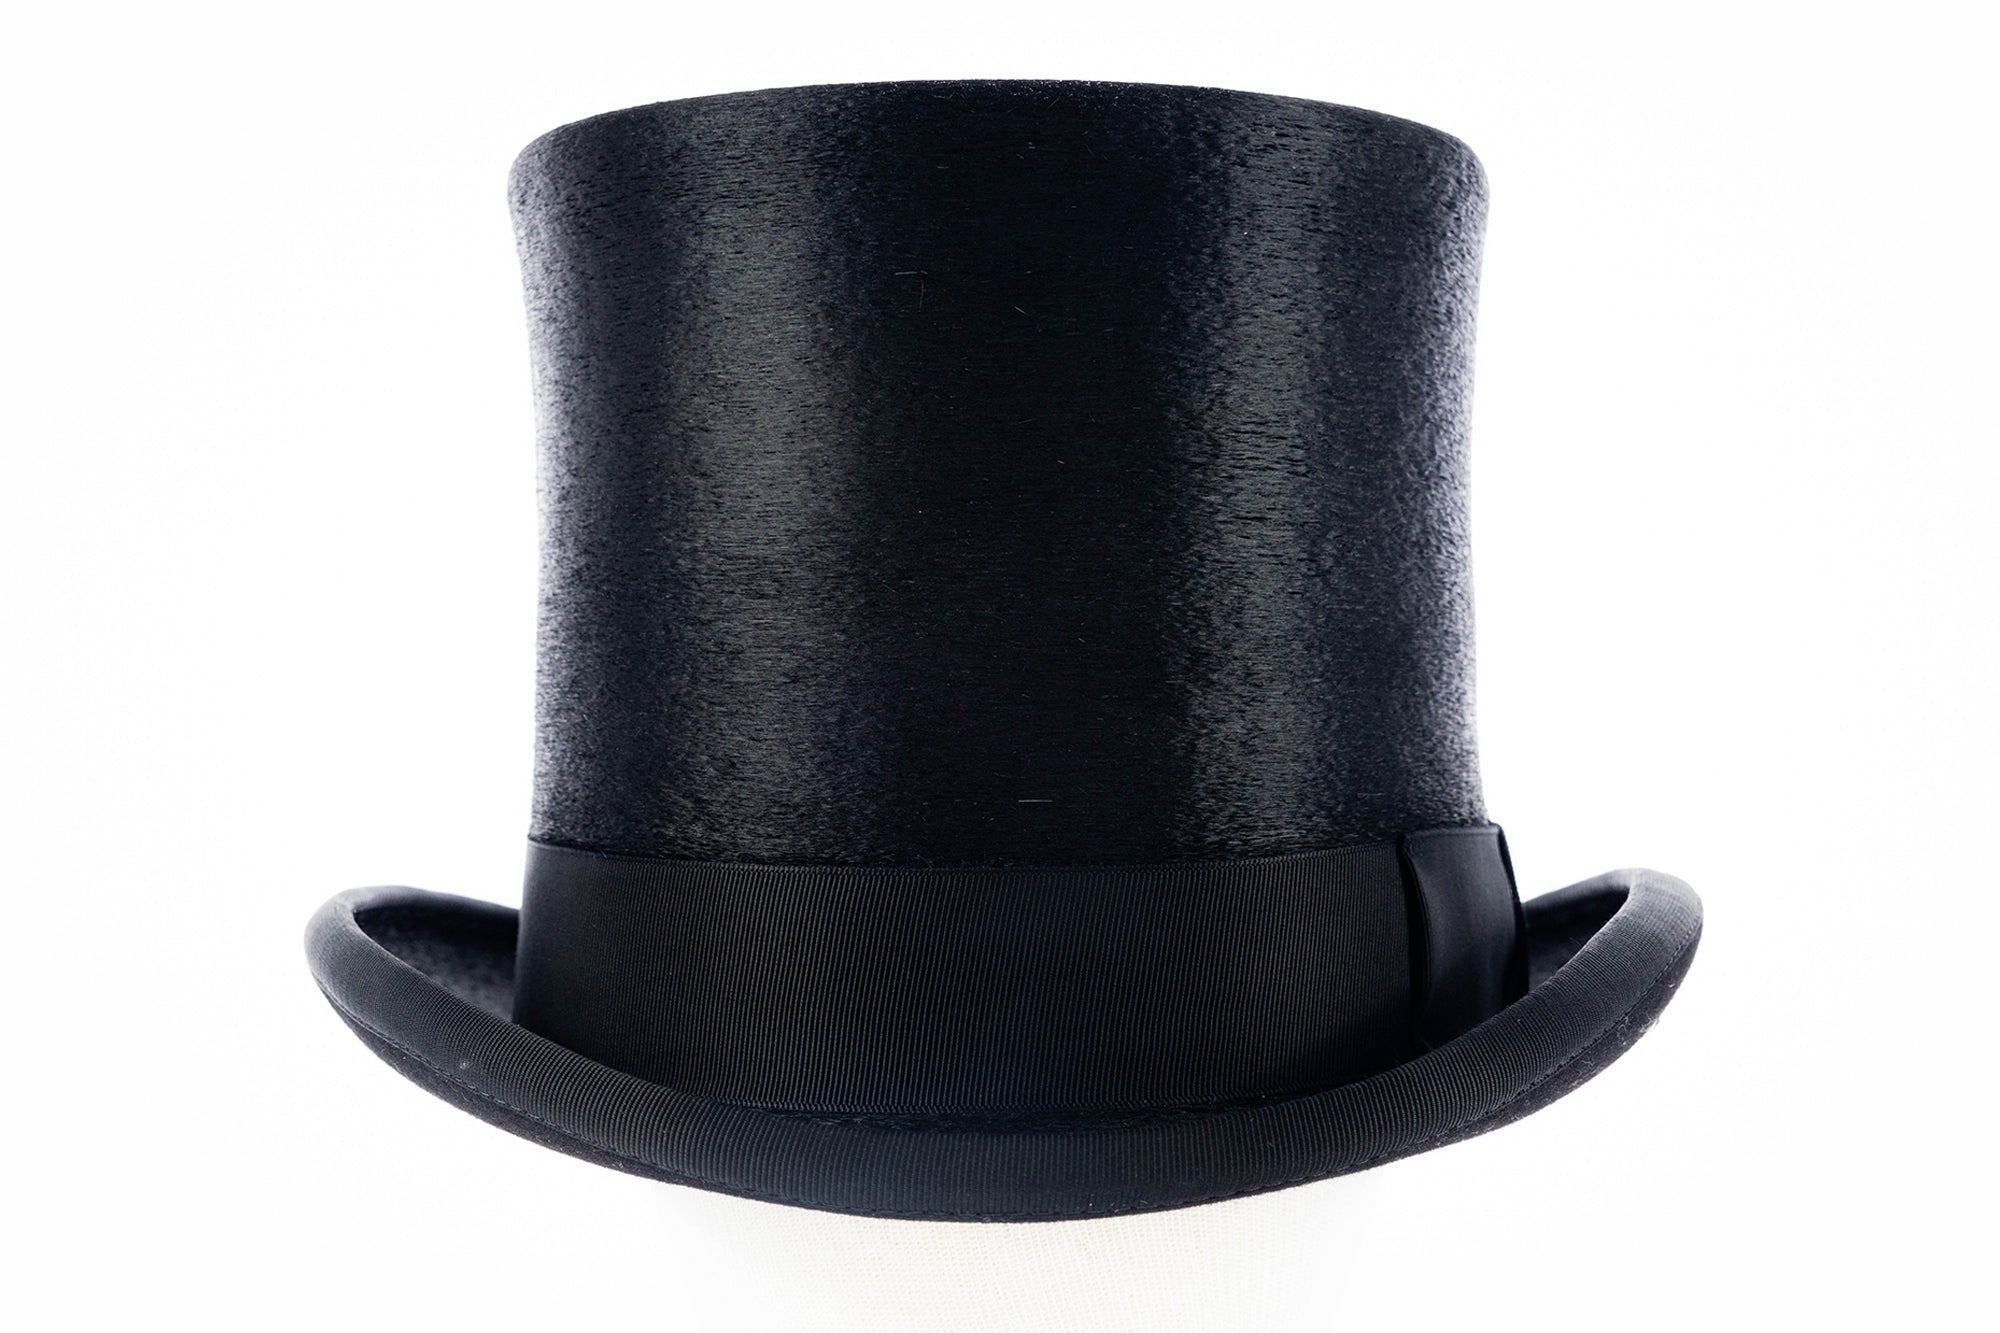 The Top Hat – Bates Hatters of London